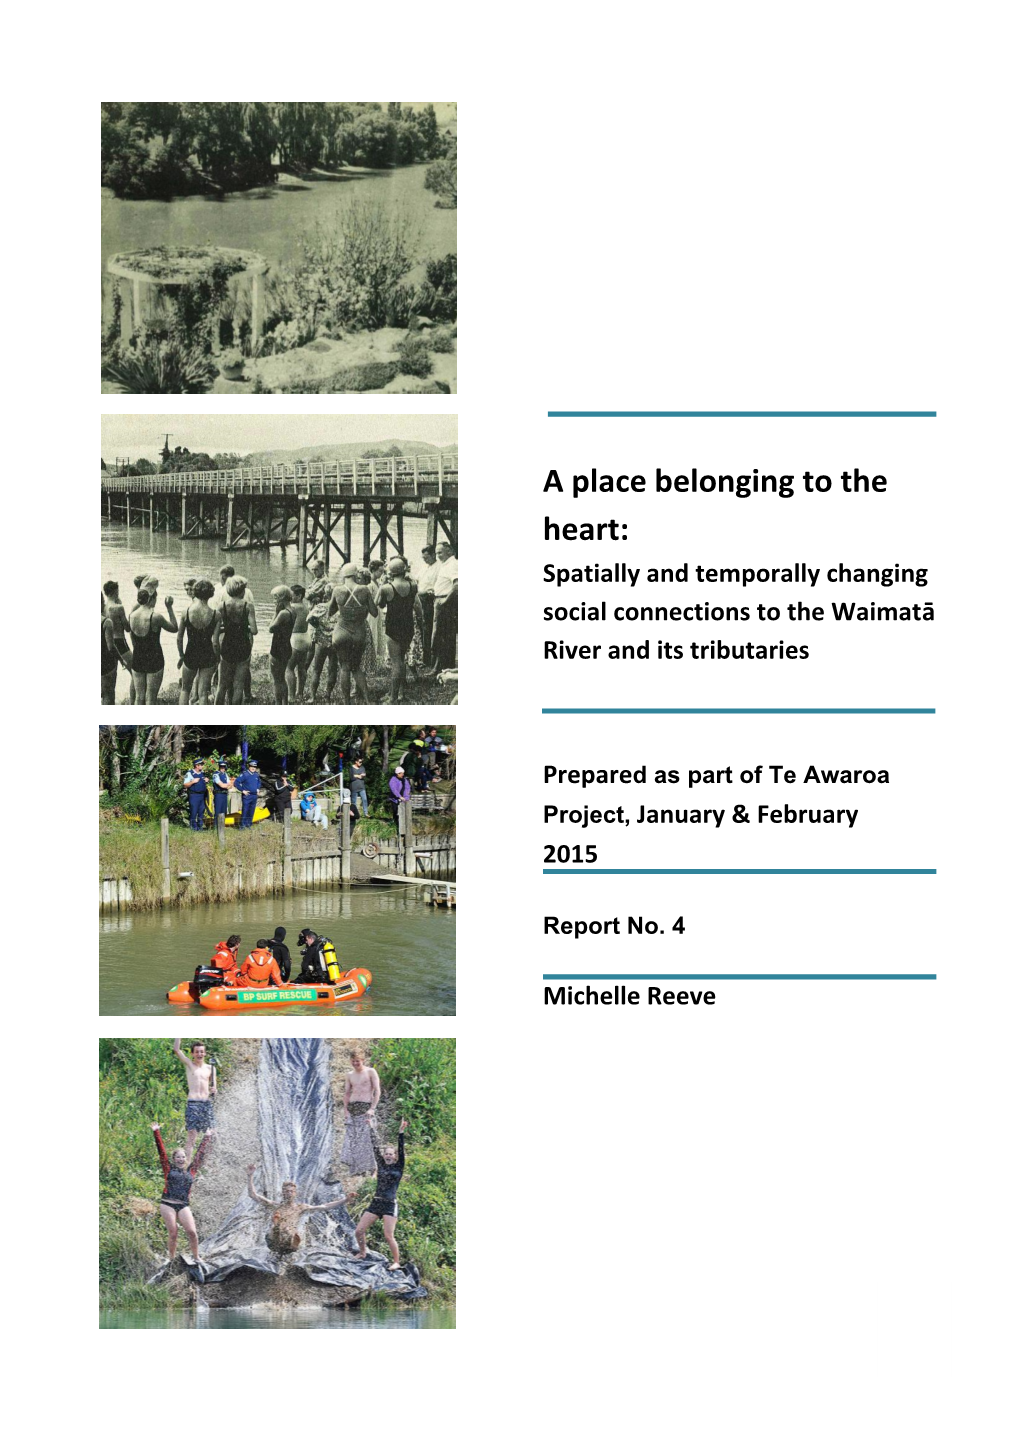 A Place Belonging to the Heart: Spatially and Temporally Changing Social Connections to the Waimatā River and Its Tributaries